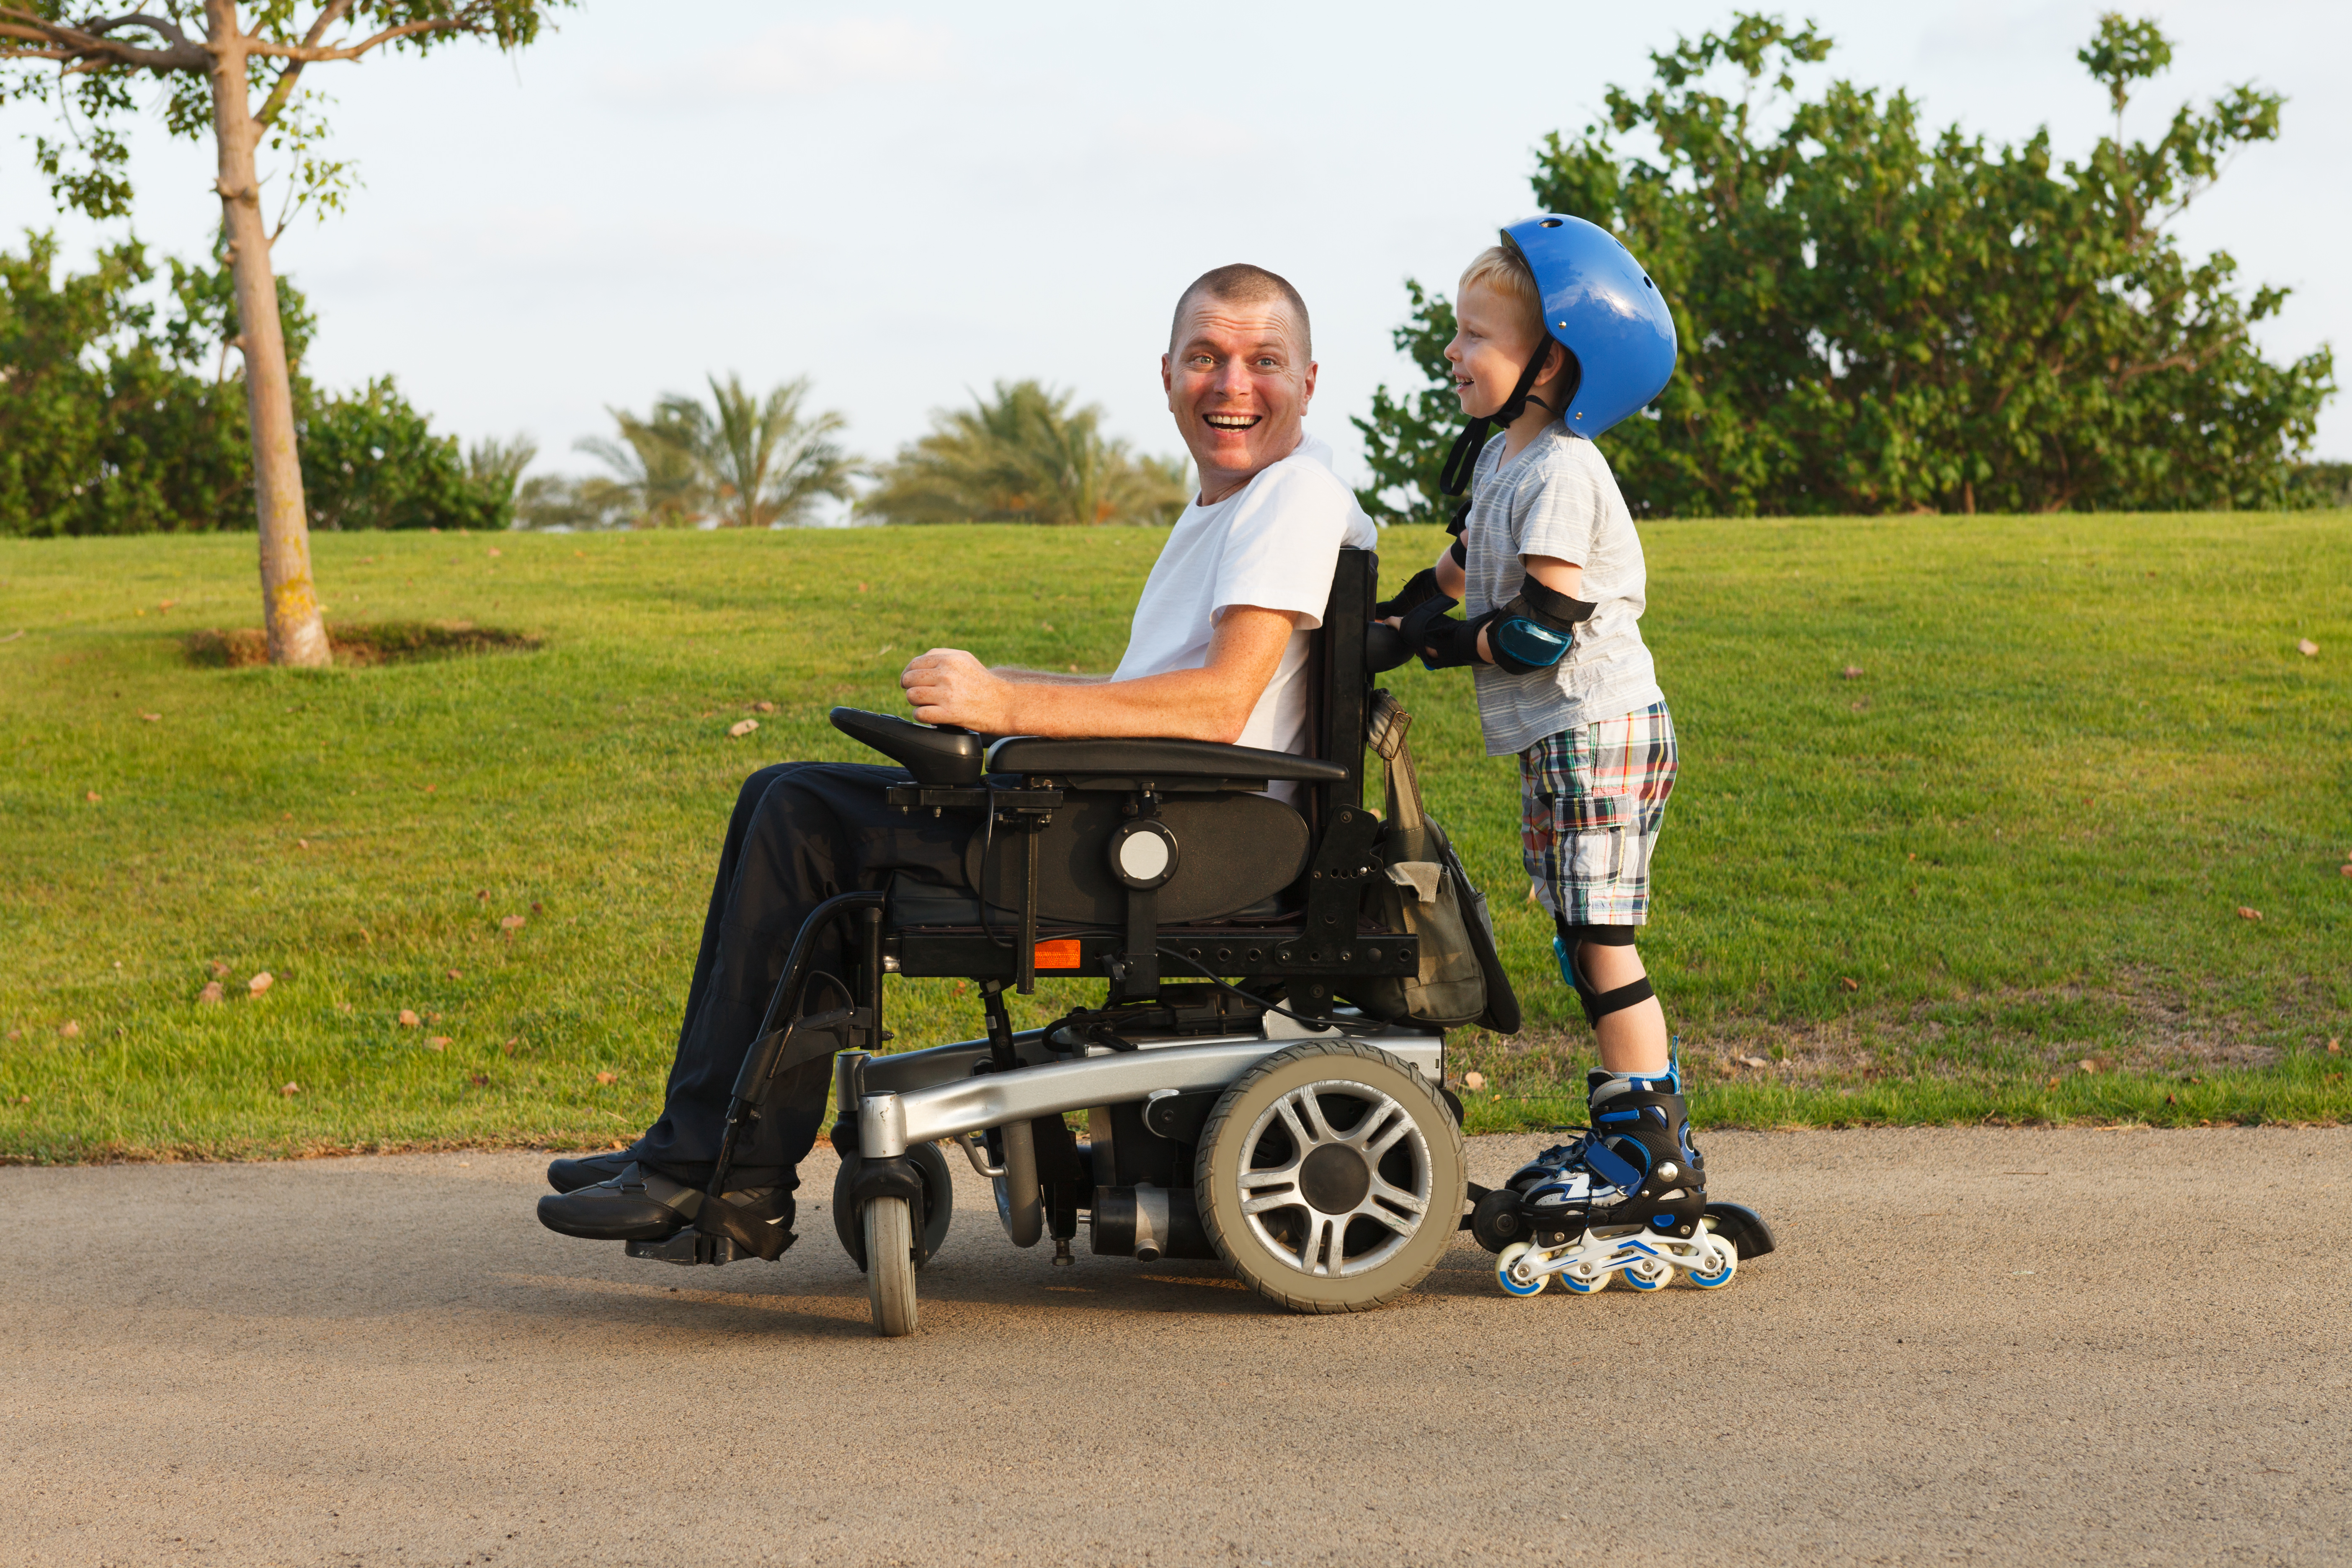 Disabled father rollerblading with son.